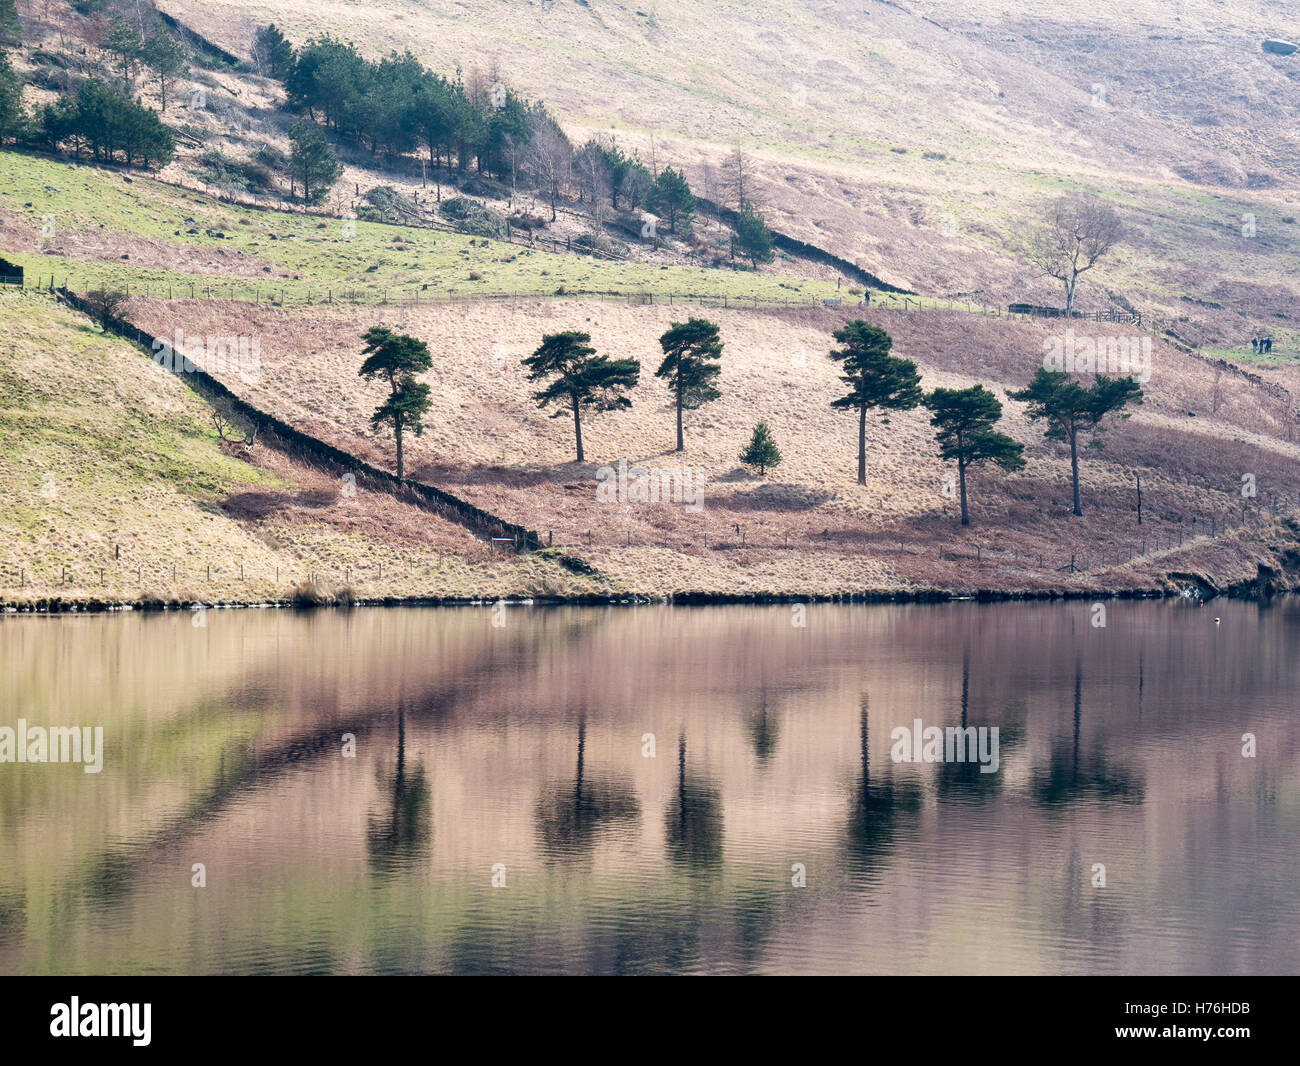 Reflections of trees and moorland in reservoir Stock Photo